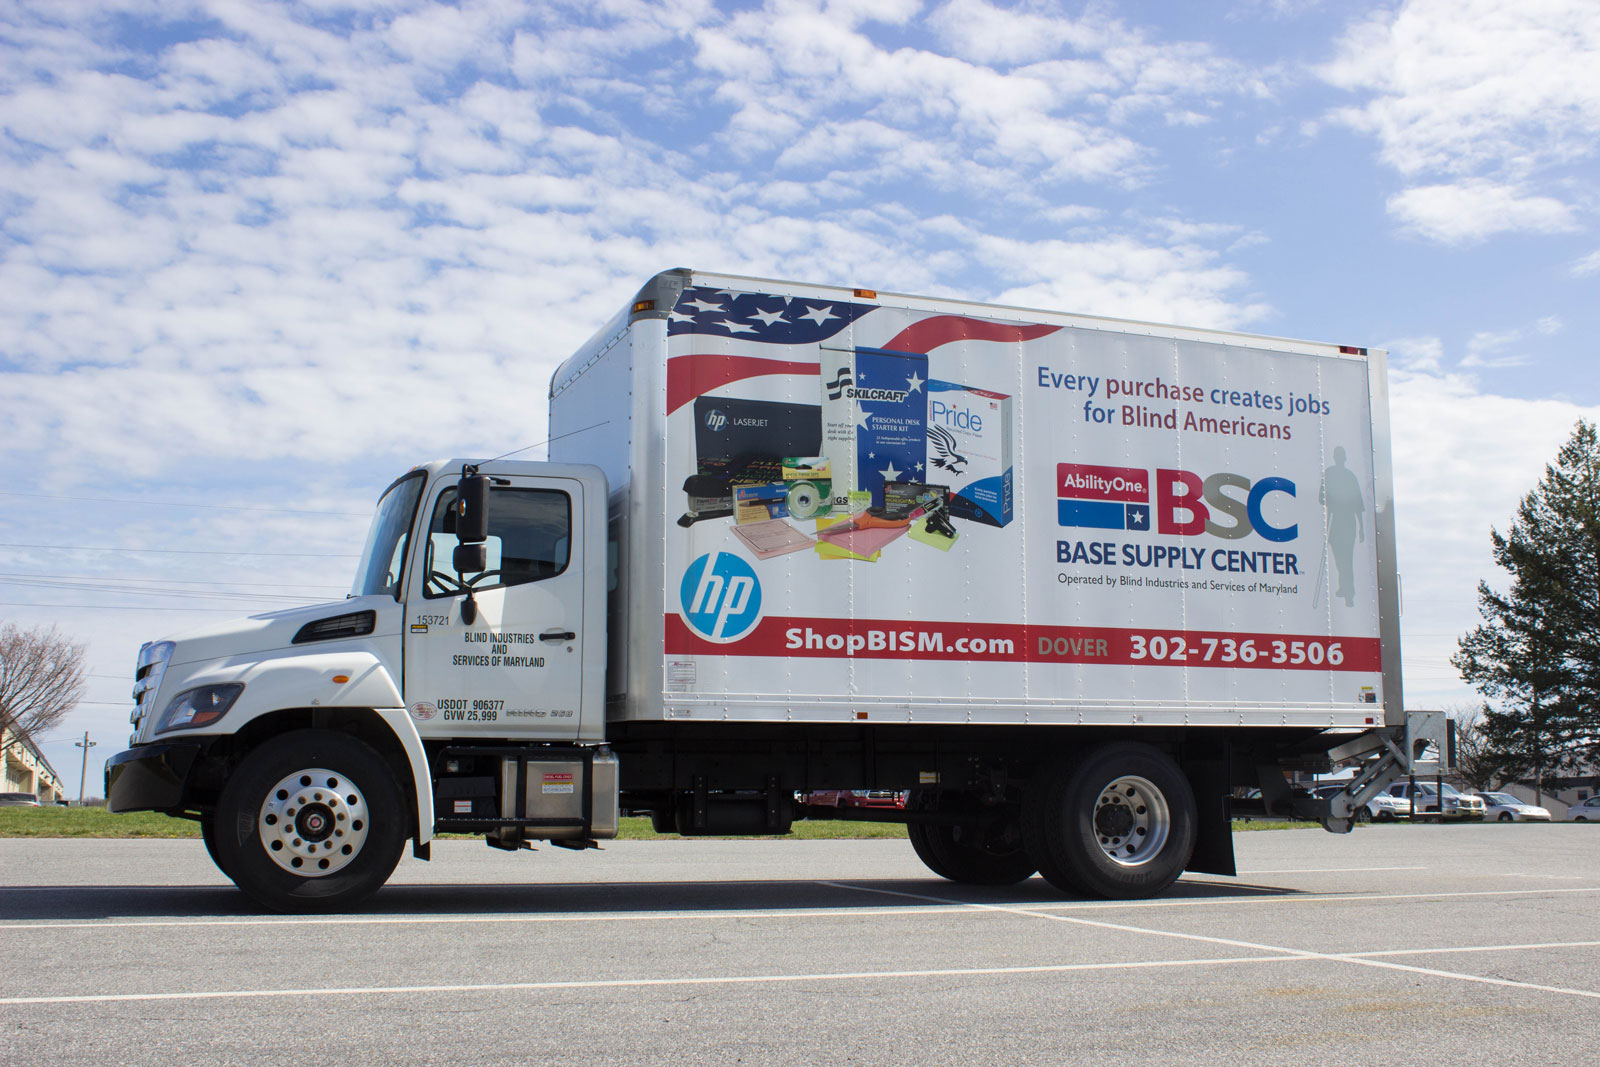 Box truck with BSC logo and product display on side